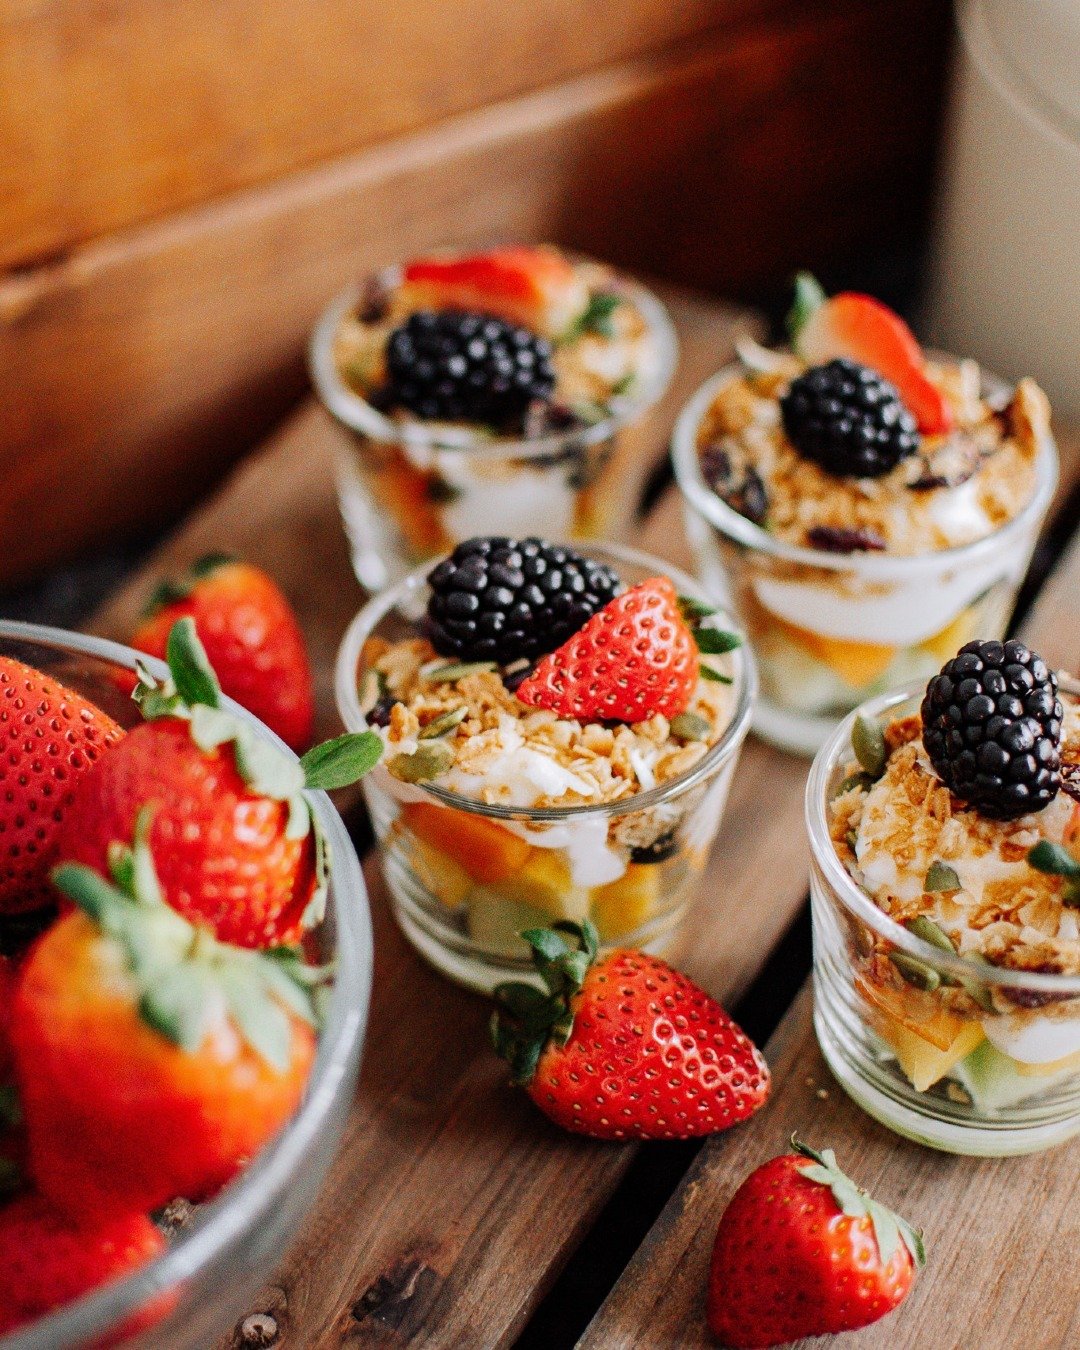 🍓Start your day with a yogurt parfait, with fresh fruit, granola and lavender honey. Delivered to your office bright and early! ☀️
From corporate luncheons to nutritious breakfast spreads, our Peake drivers deliver excellence every day! 🚚
For more 